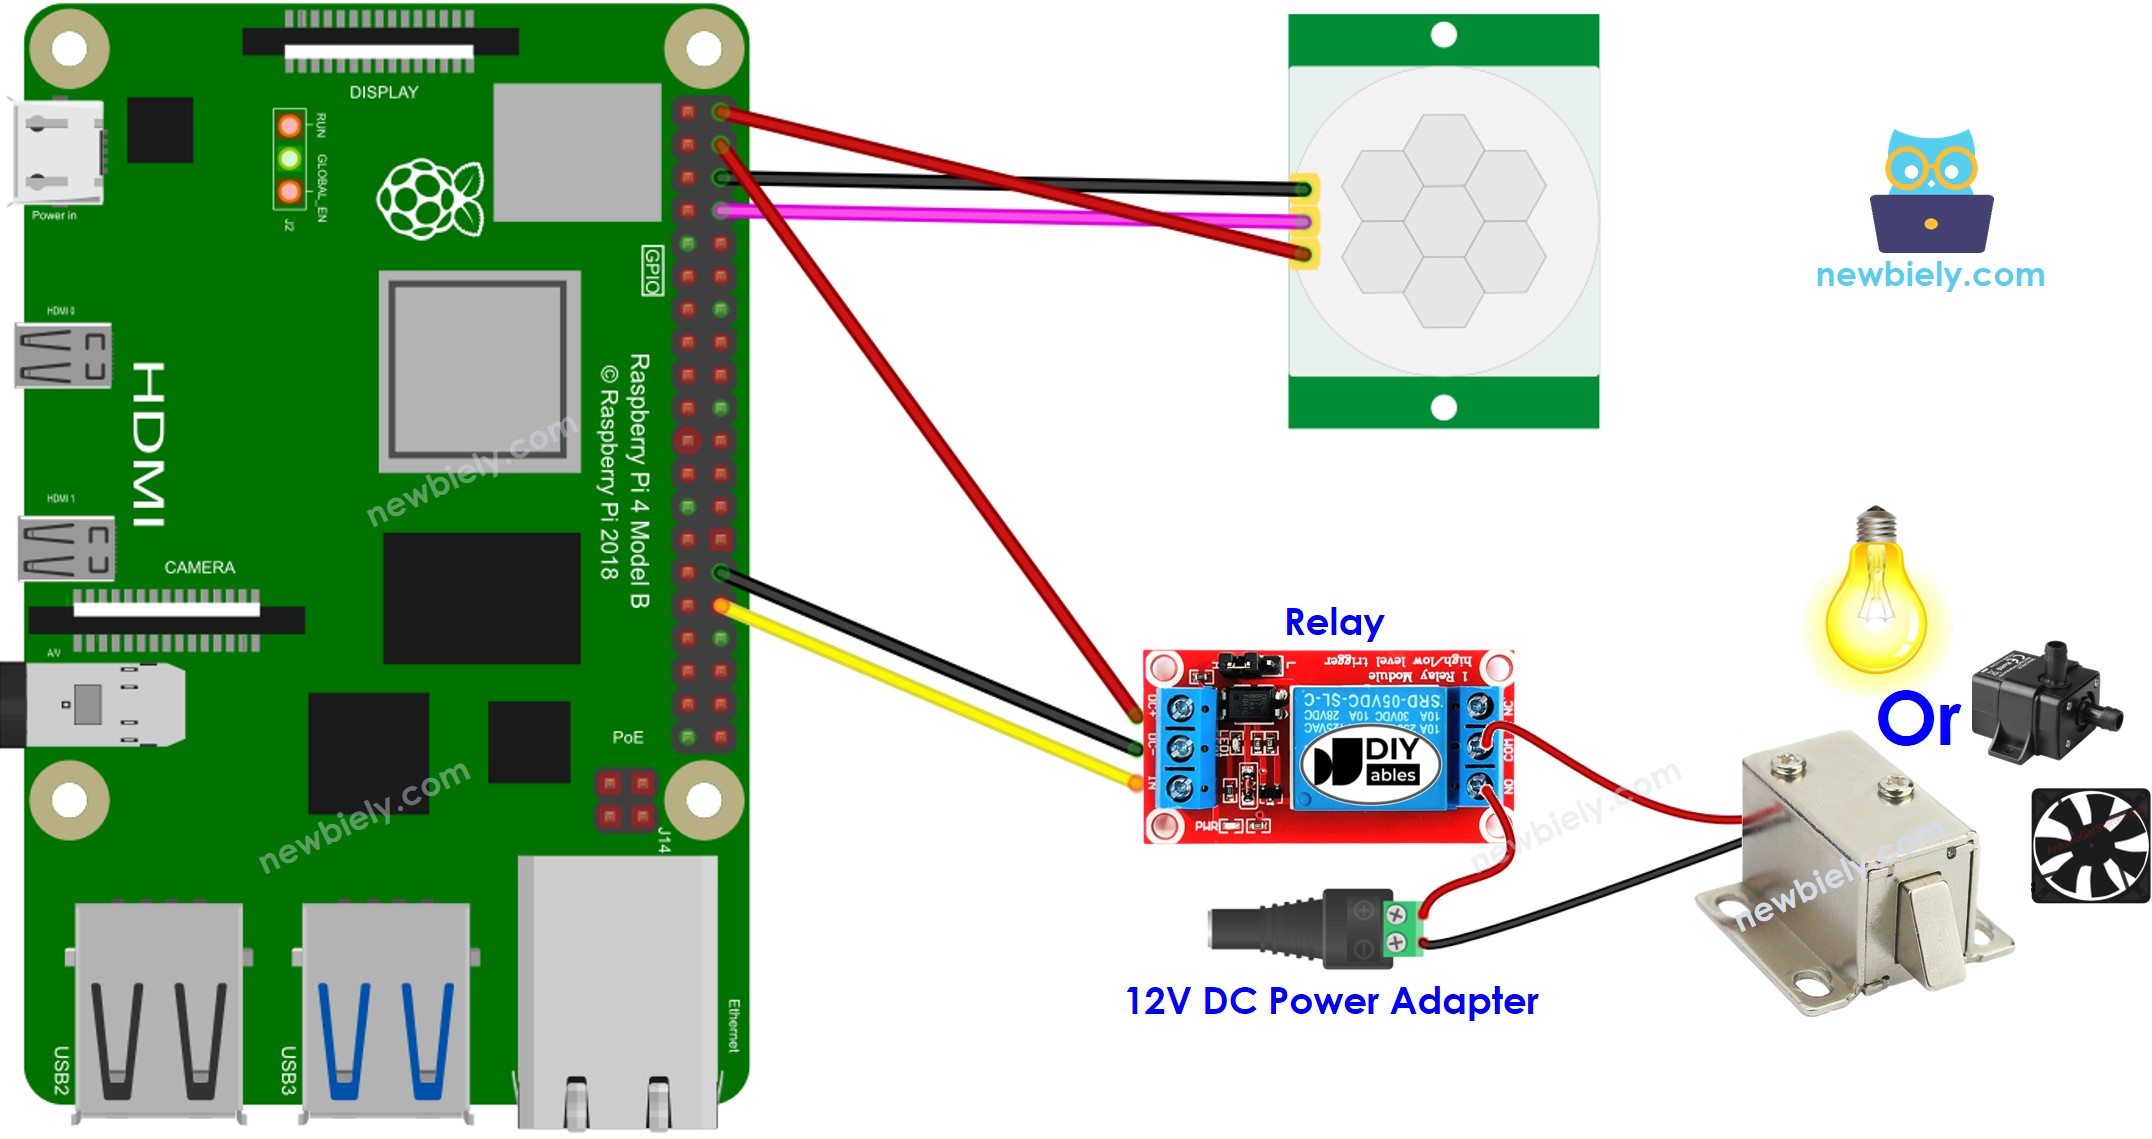 The wiring diagram between Raspberry Pi and Motion Sensor Relay